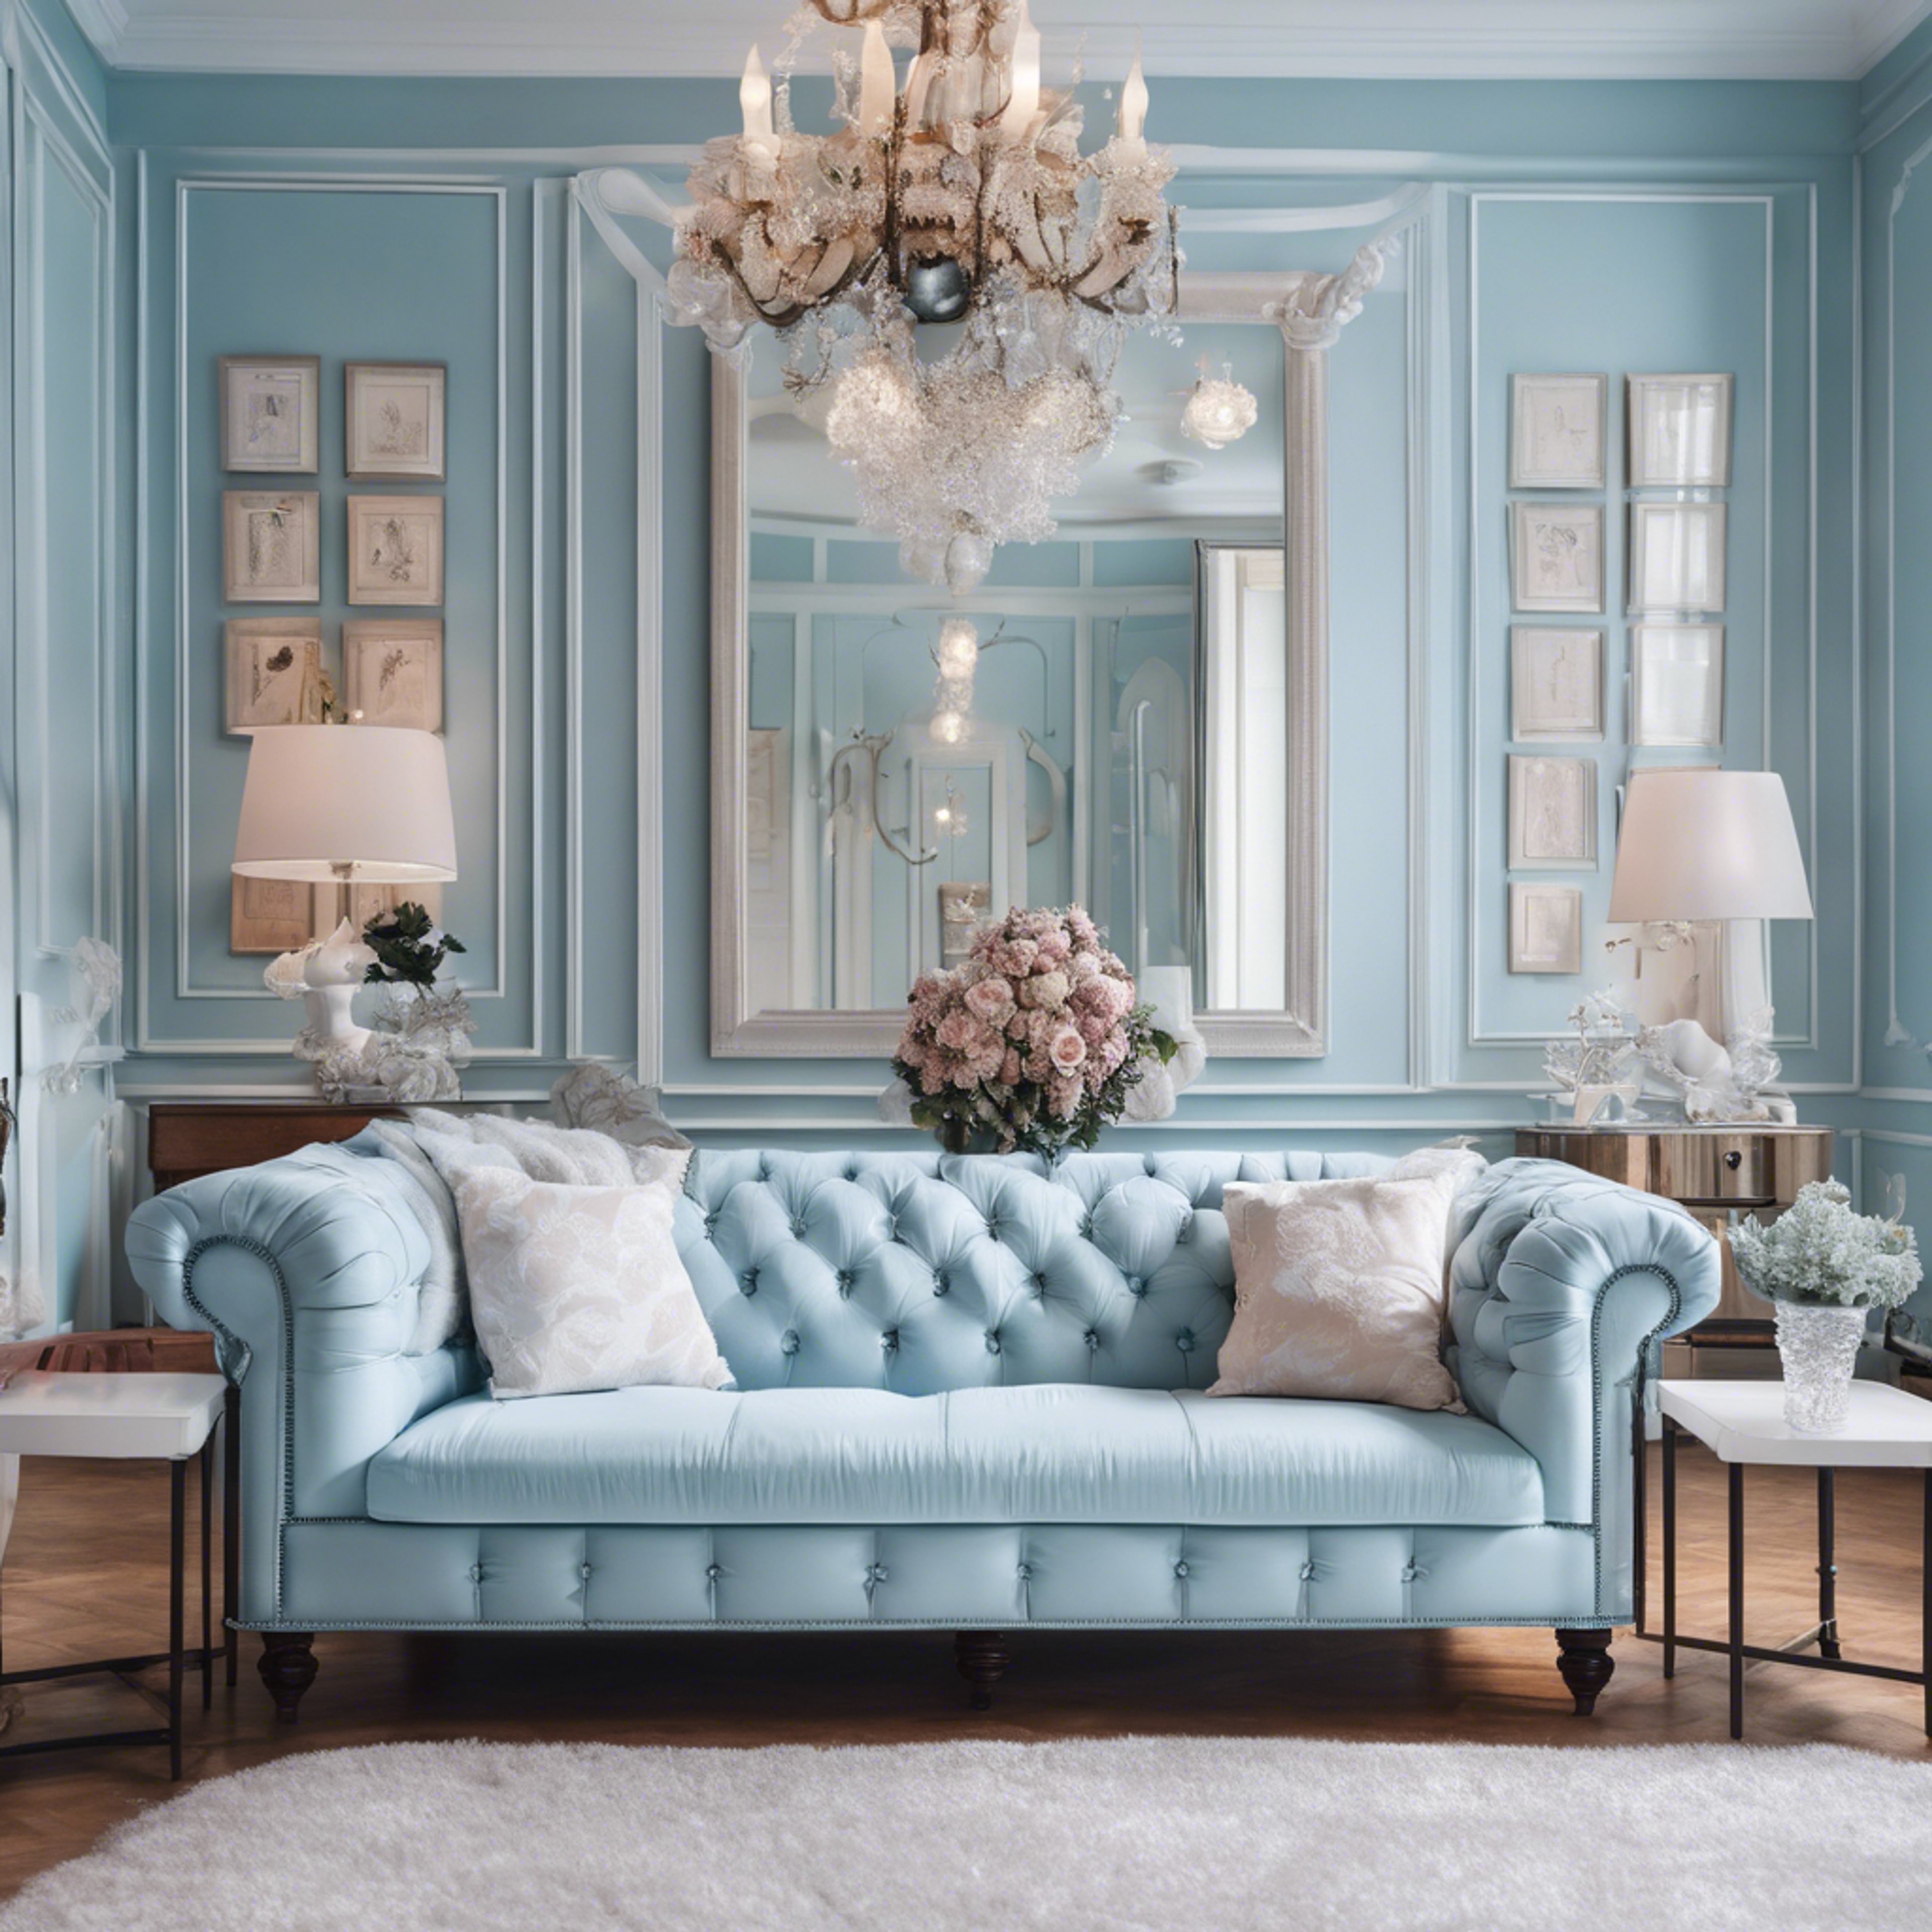 A preppy styled room with pastel blue wallpaper, Chesterfield sofa, and white French style furniture.” Обои[3904fac215ba4f1eaa62]